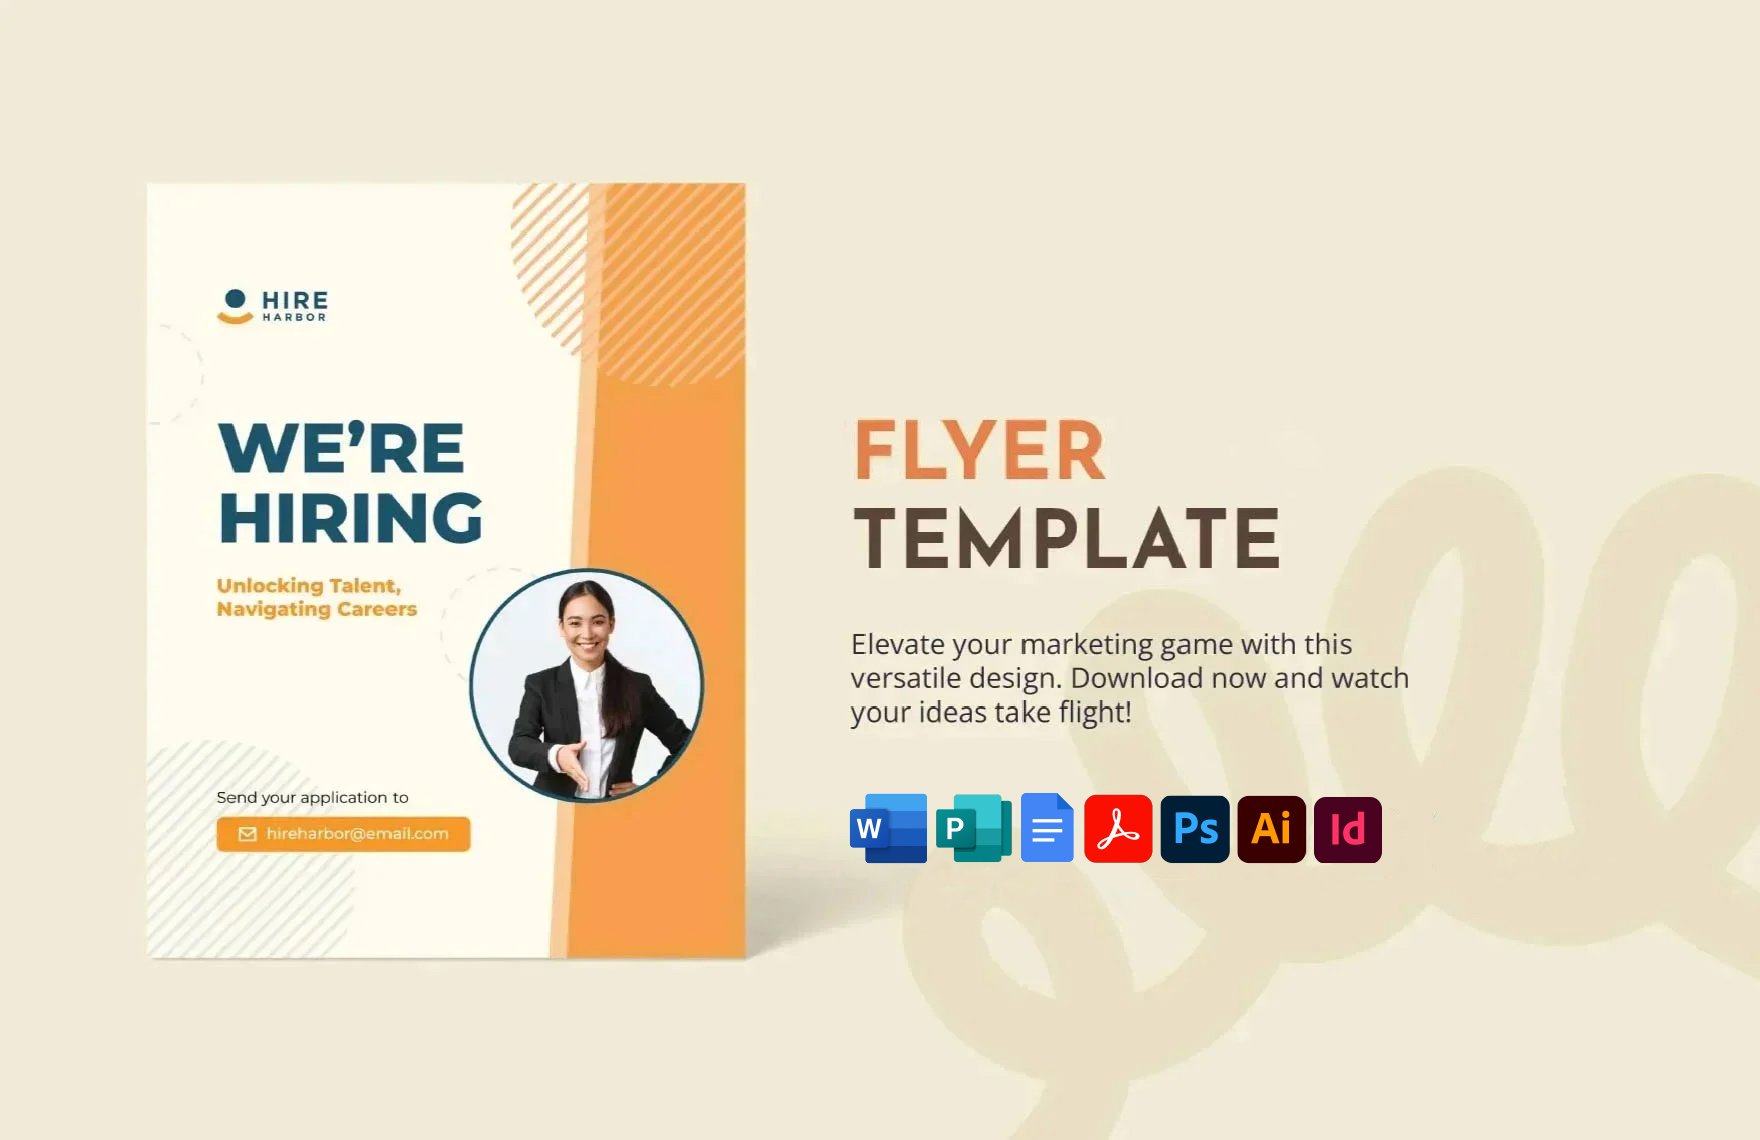 Flyer Template in PDF - FREE Download